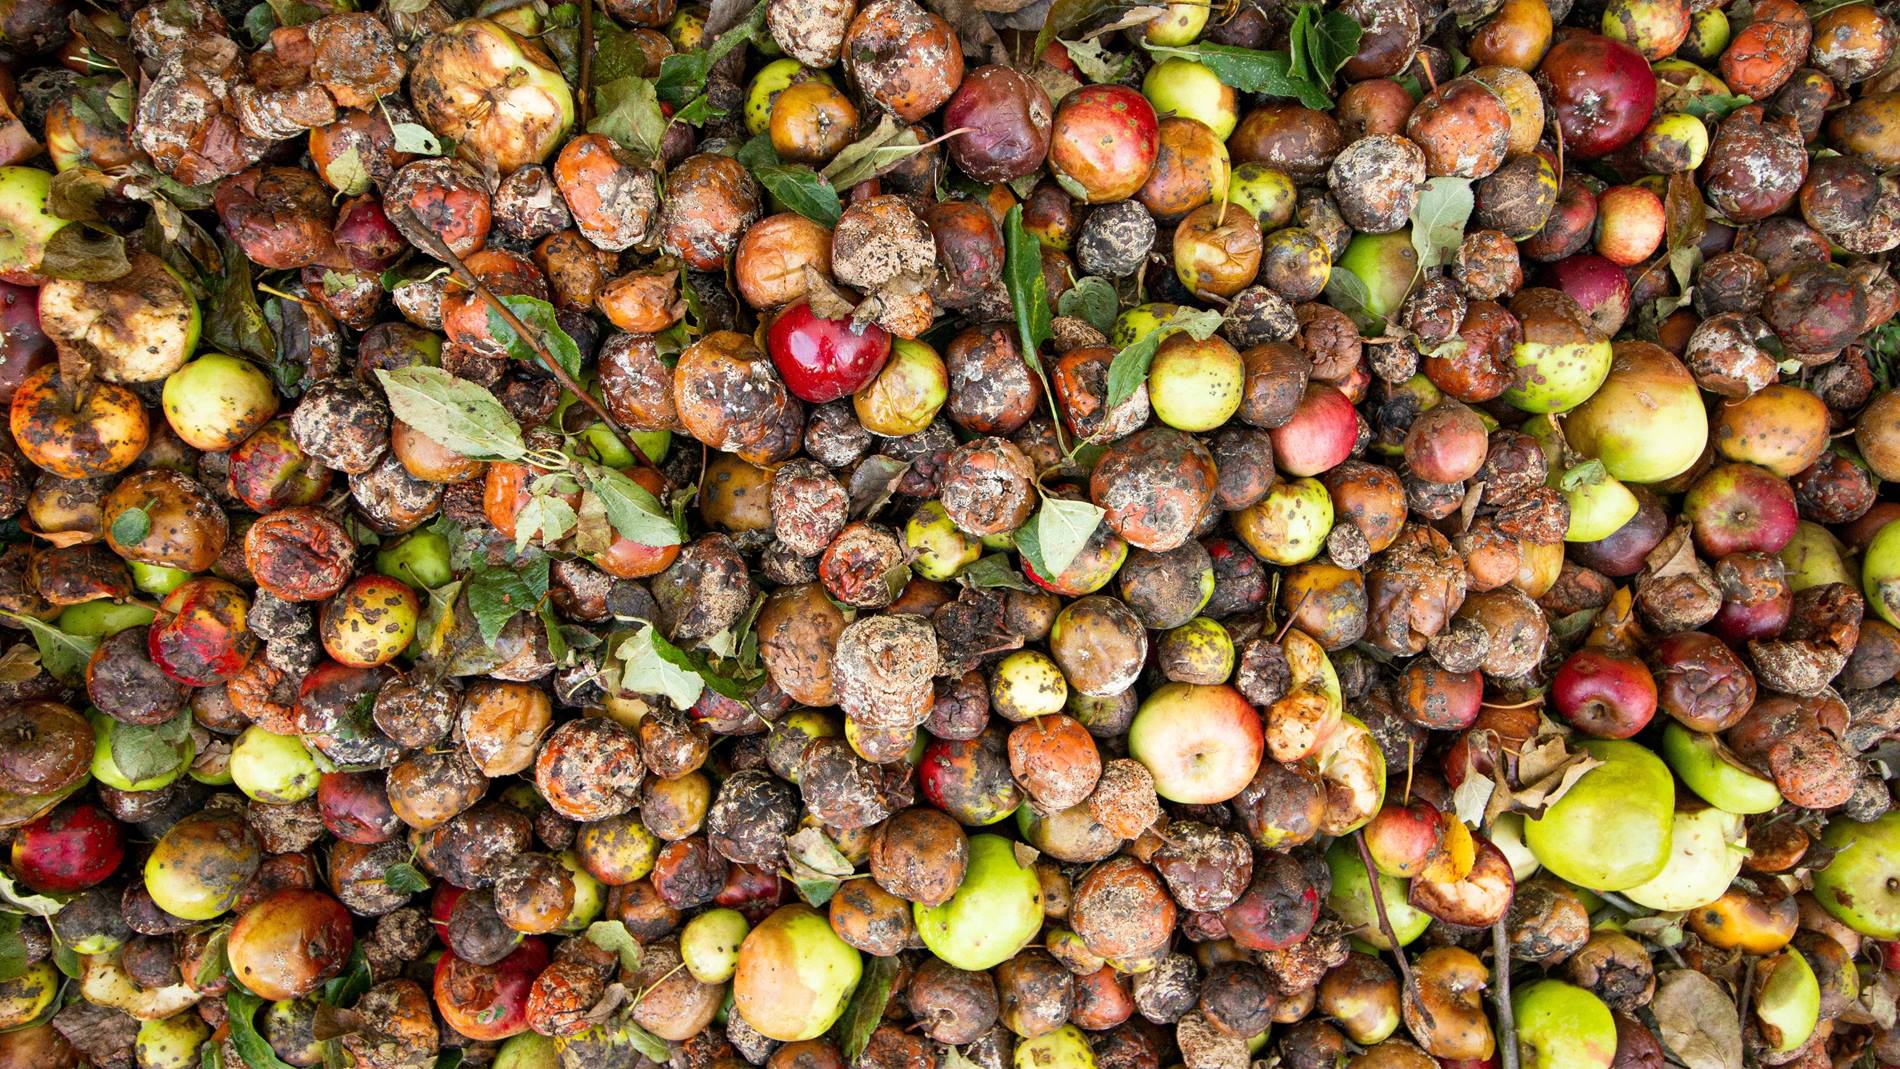 Food waste is a serious problem in the food supply chain.